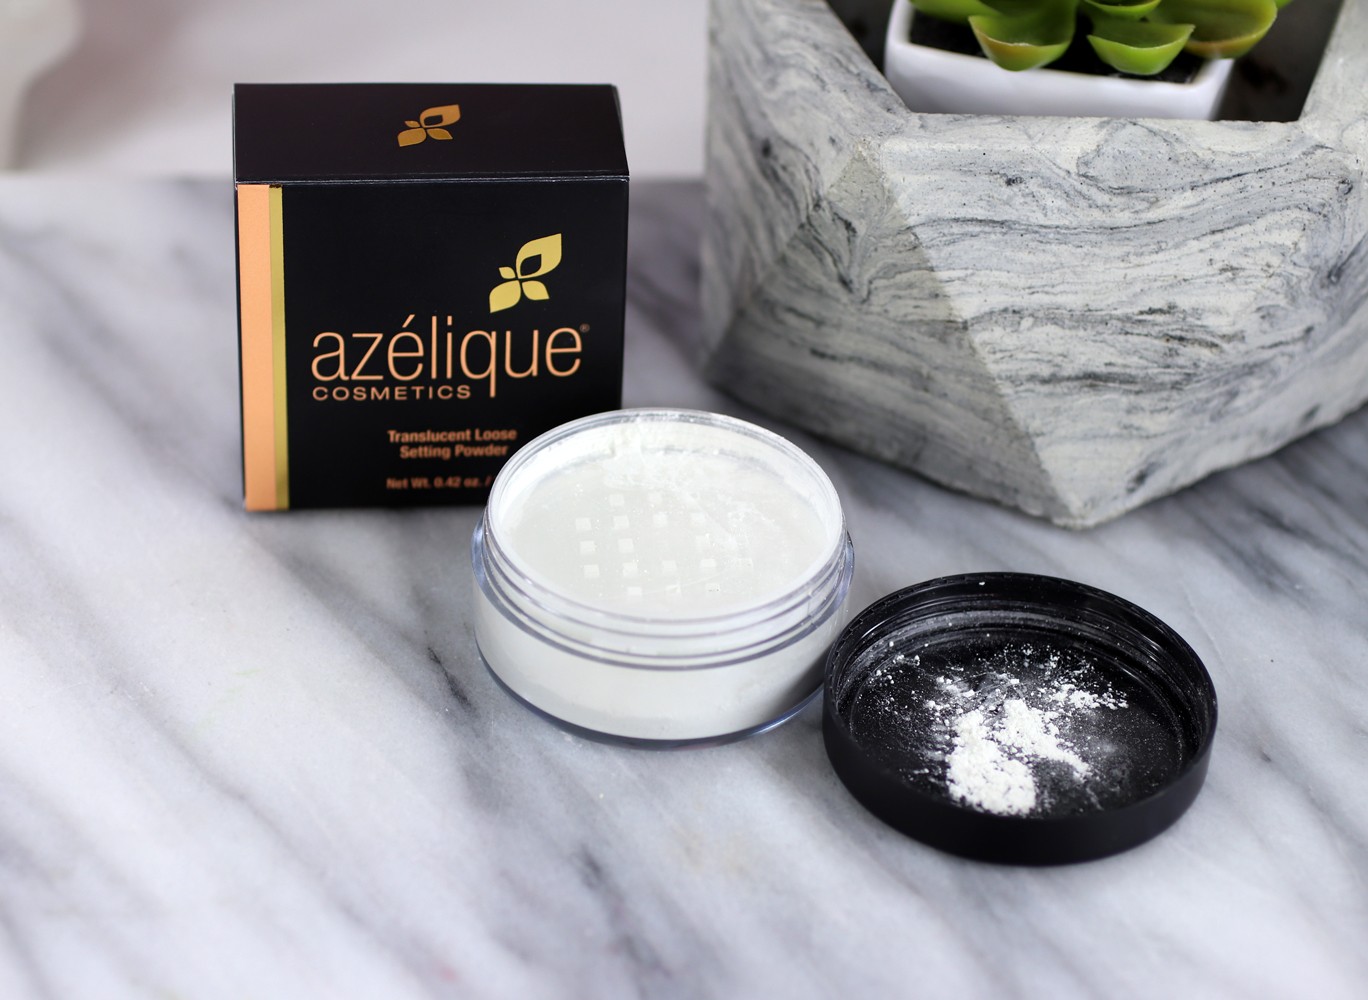 Azelique Translucent Setting Powder - Review of Azelique Cosmetics by Los Angeles cruelty free beauty blogger My Beauty Bunny